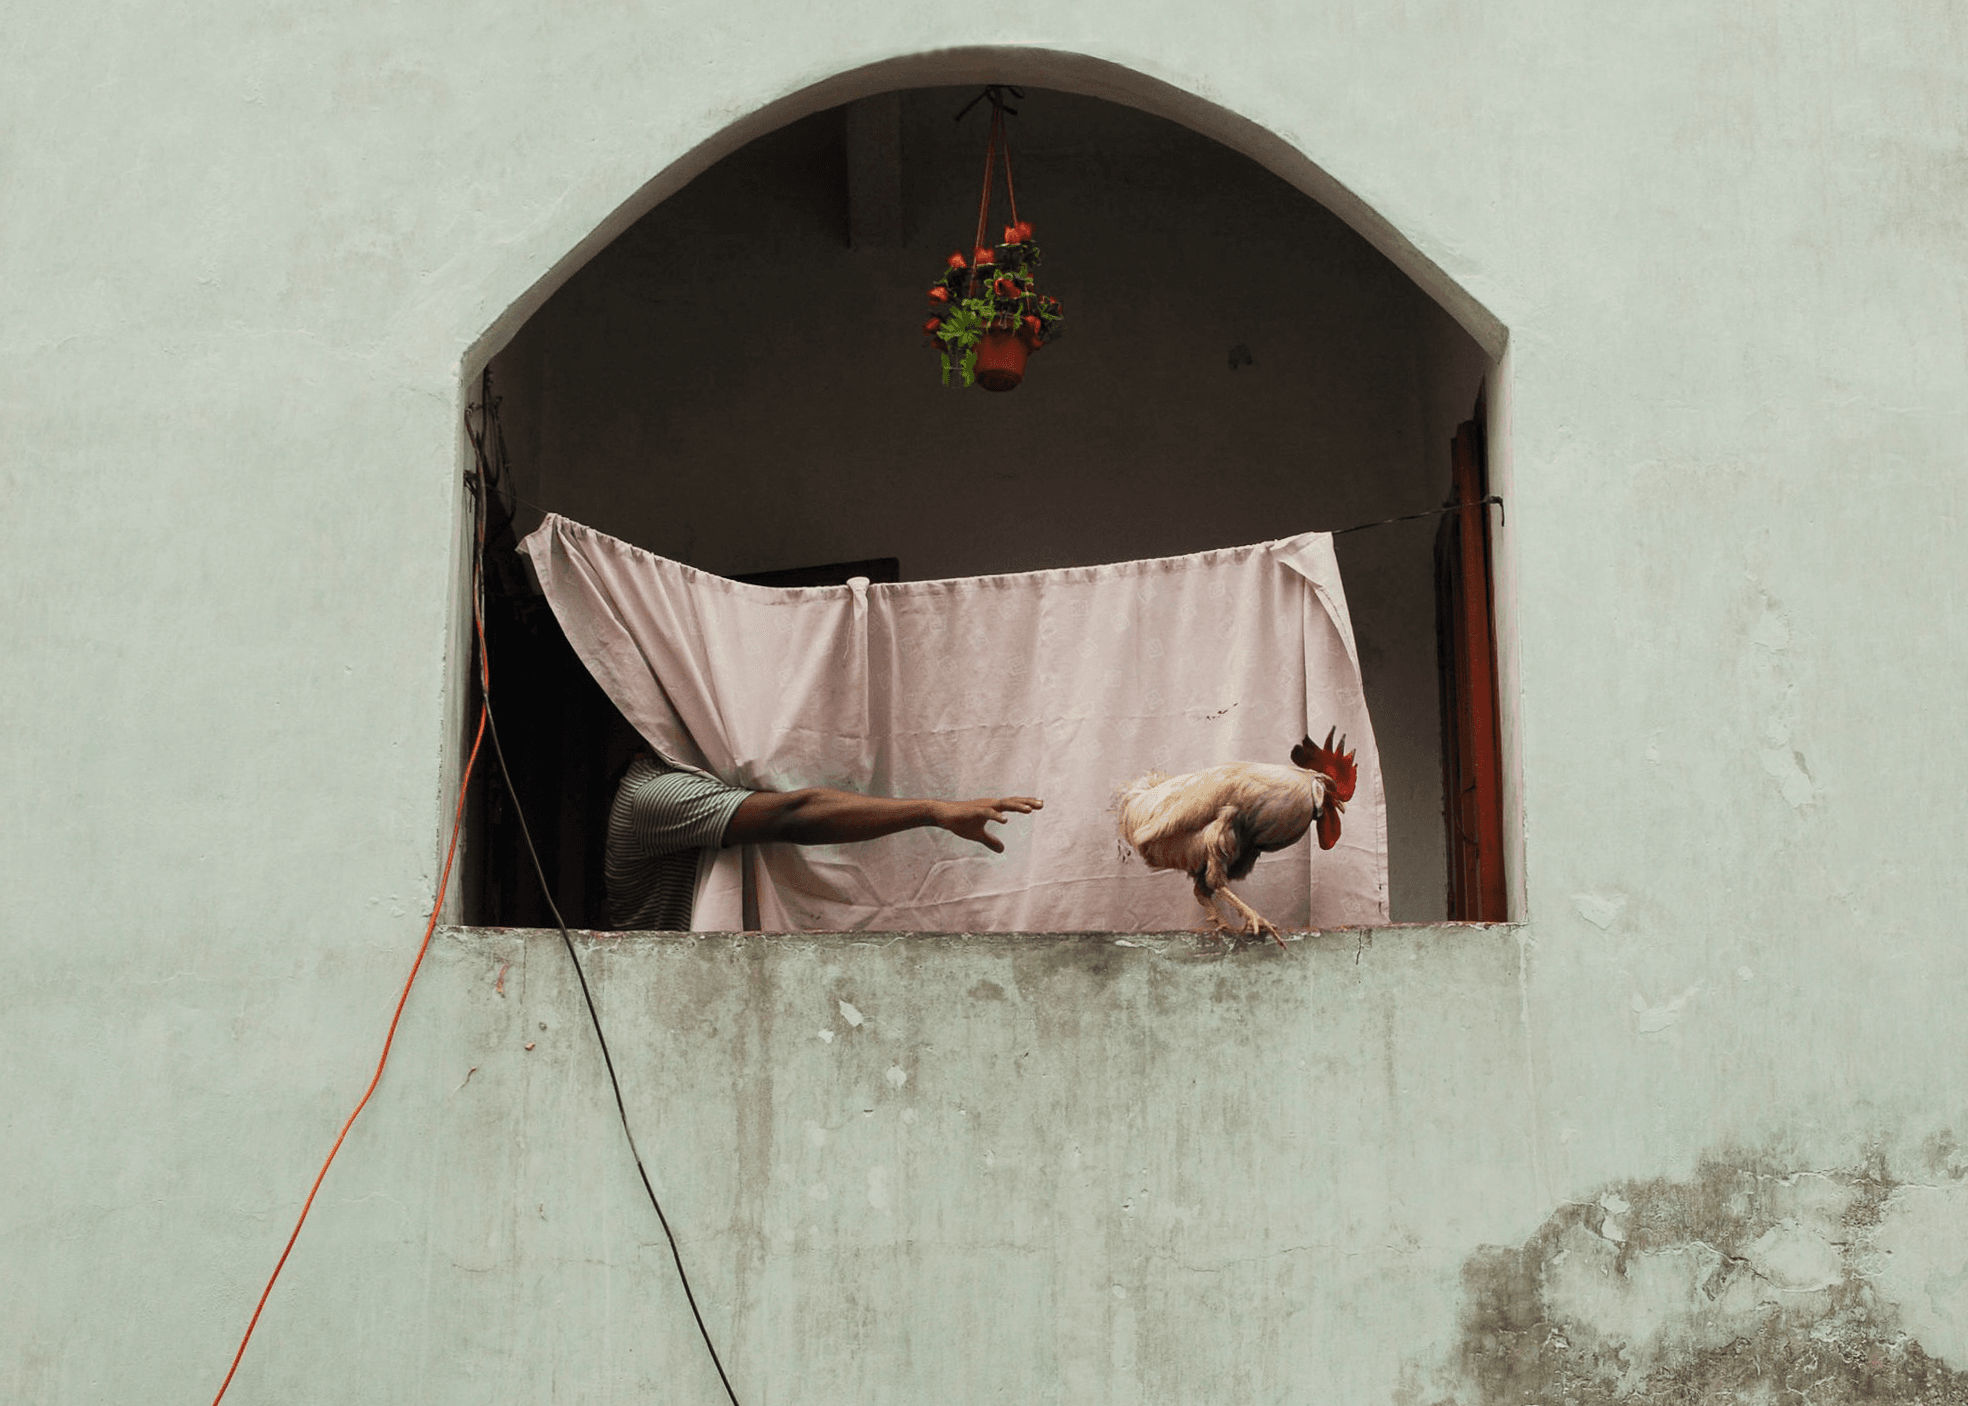 Rooster And Man (Pakistan)